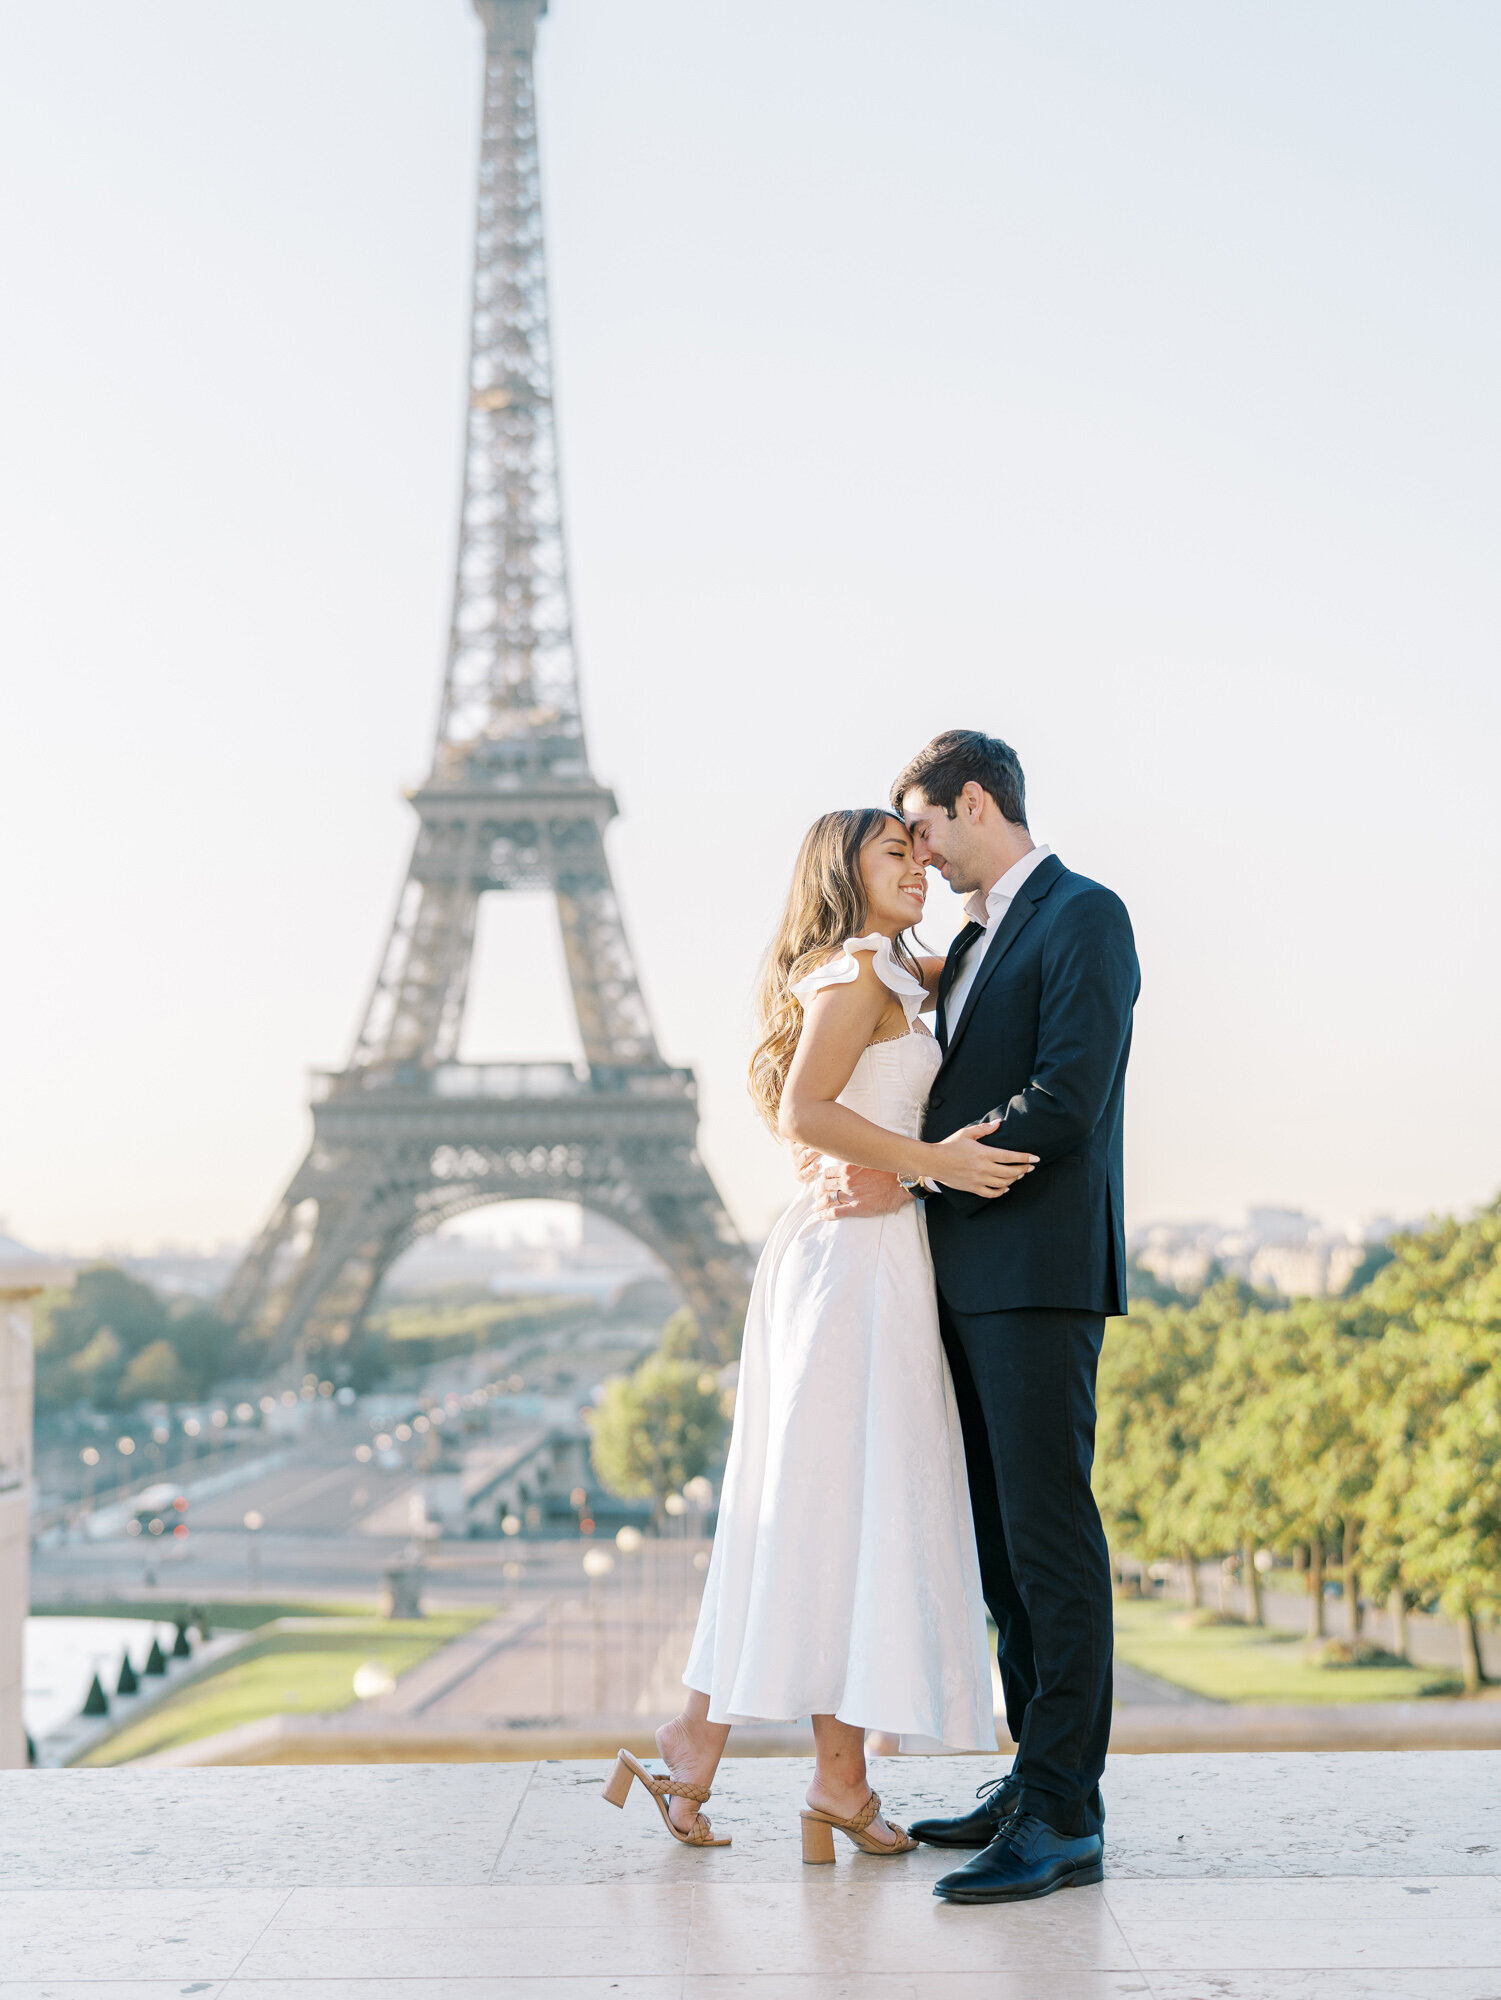 Christine & Kyle Paris Photosession by Tatyana Chaiko photographer in France-39